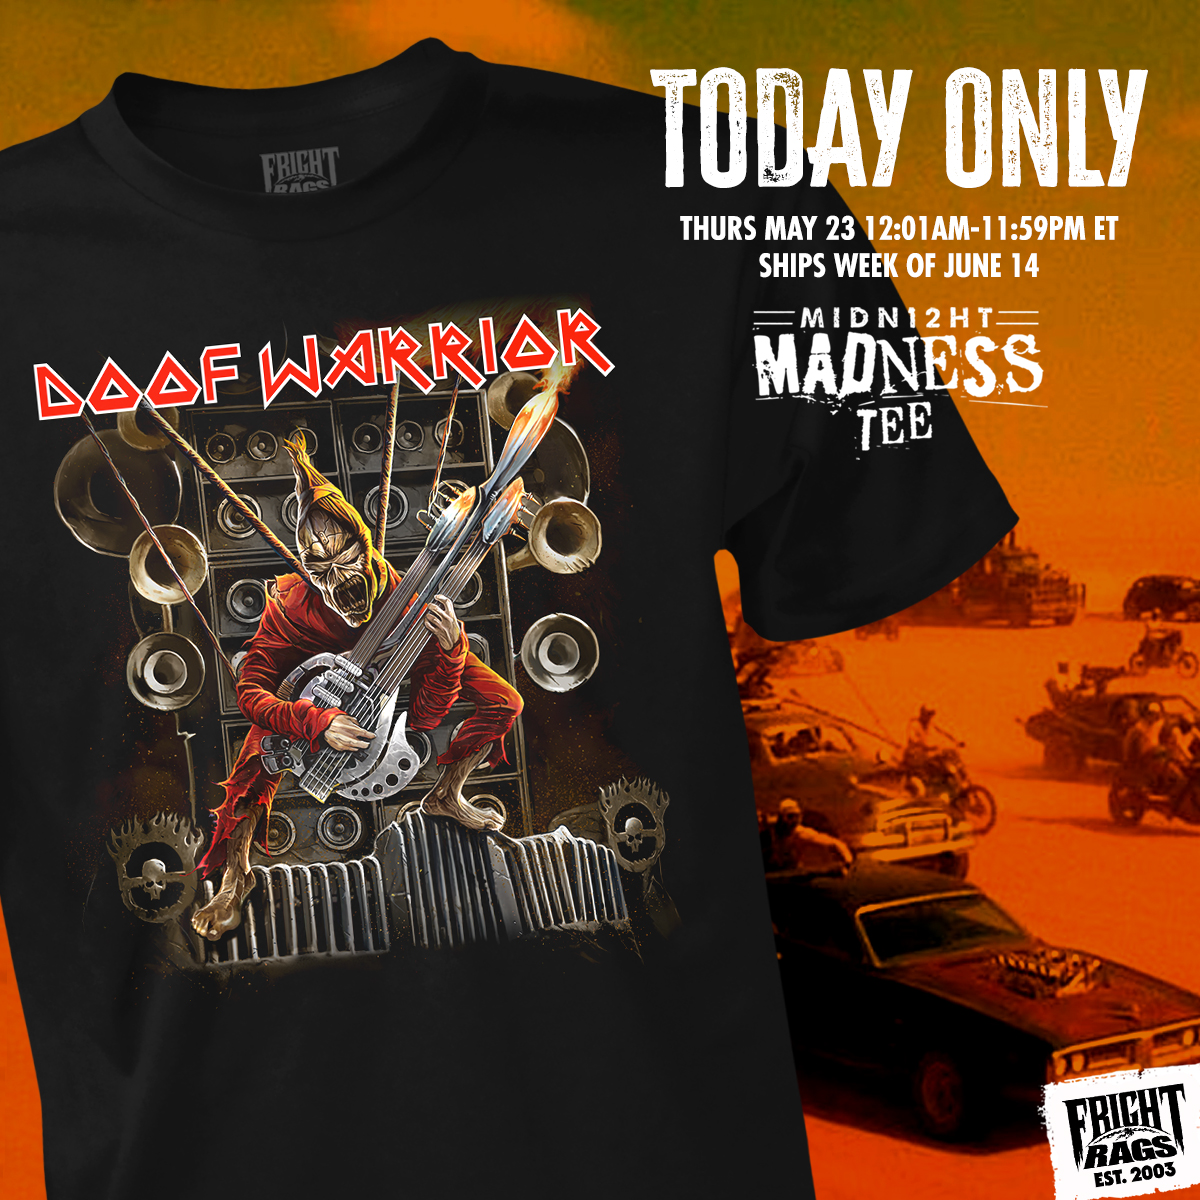 TODAY ONLY! The classic DOOF WARRIOR homage design by artist Abrar Ajmal is back for one day for 25 bucks. Pre-order ends tonight 5/23 11:59pm ET. Ships week of June 14. 👉 SHOP: bit.ly/3QP0dGF